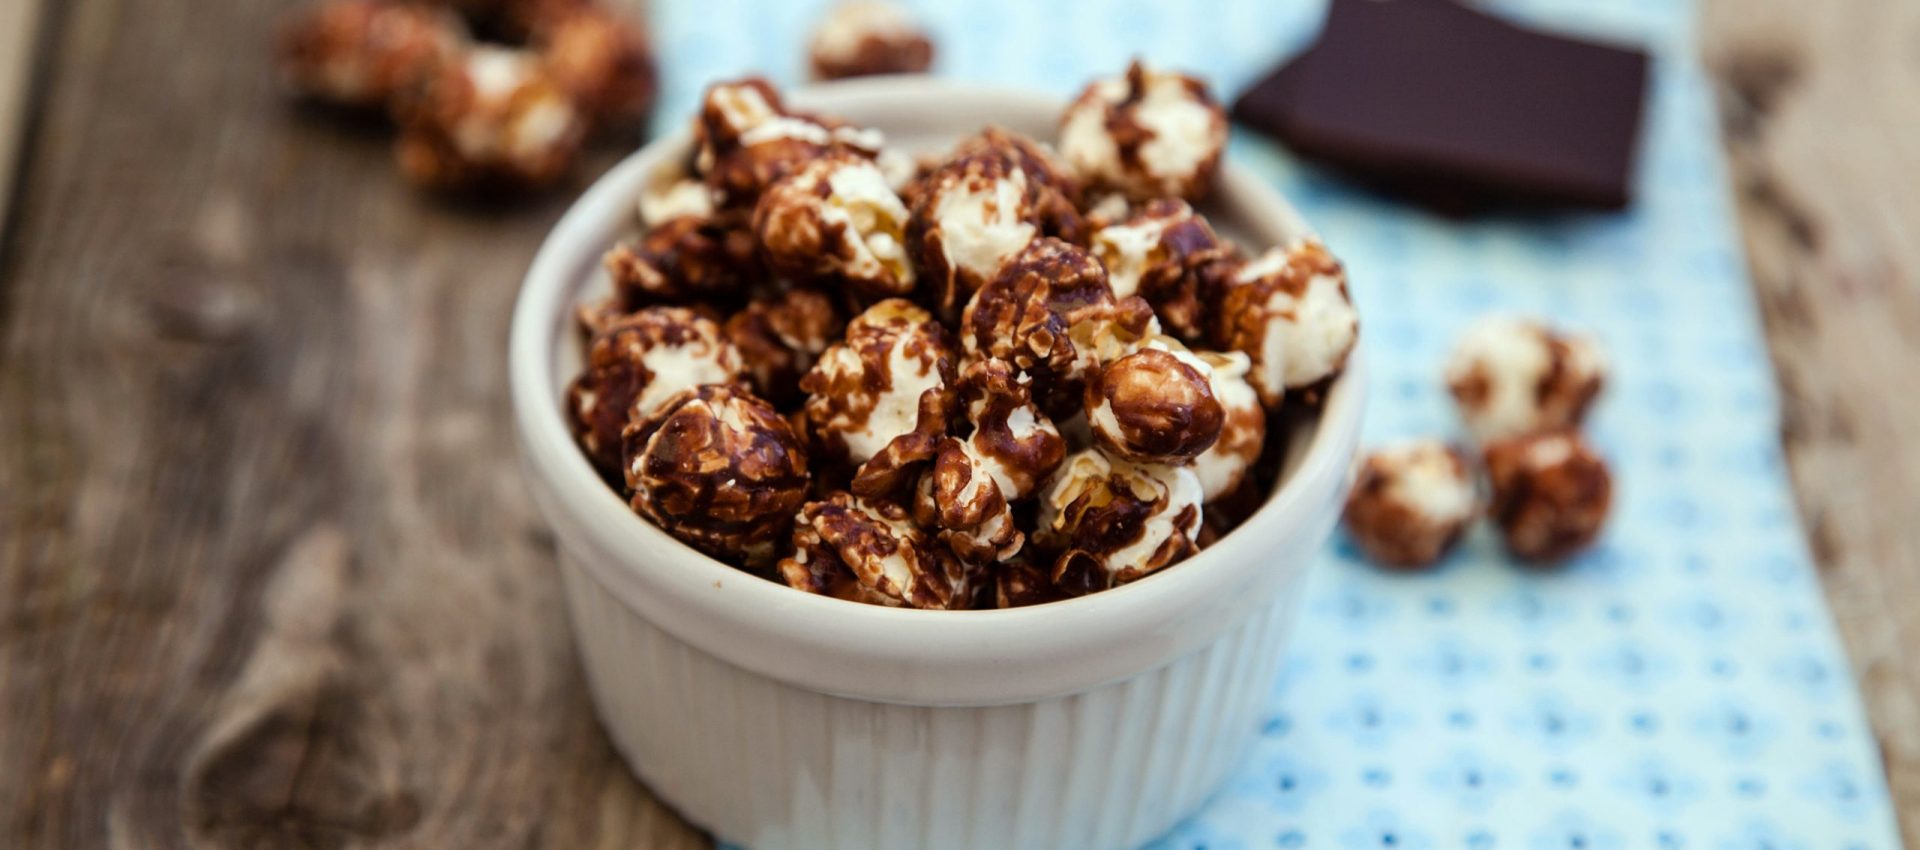 Chocolate covered popcorn in a white bowl on wooden table